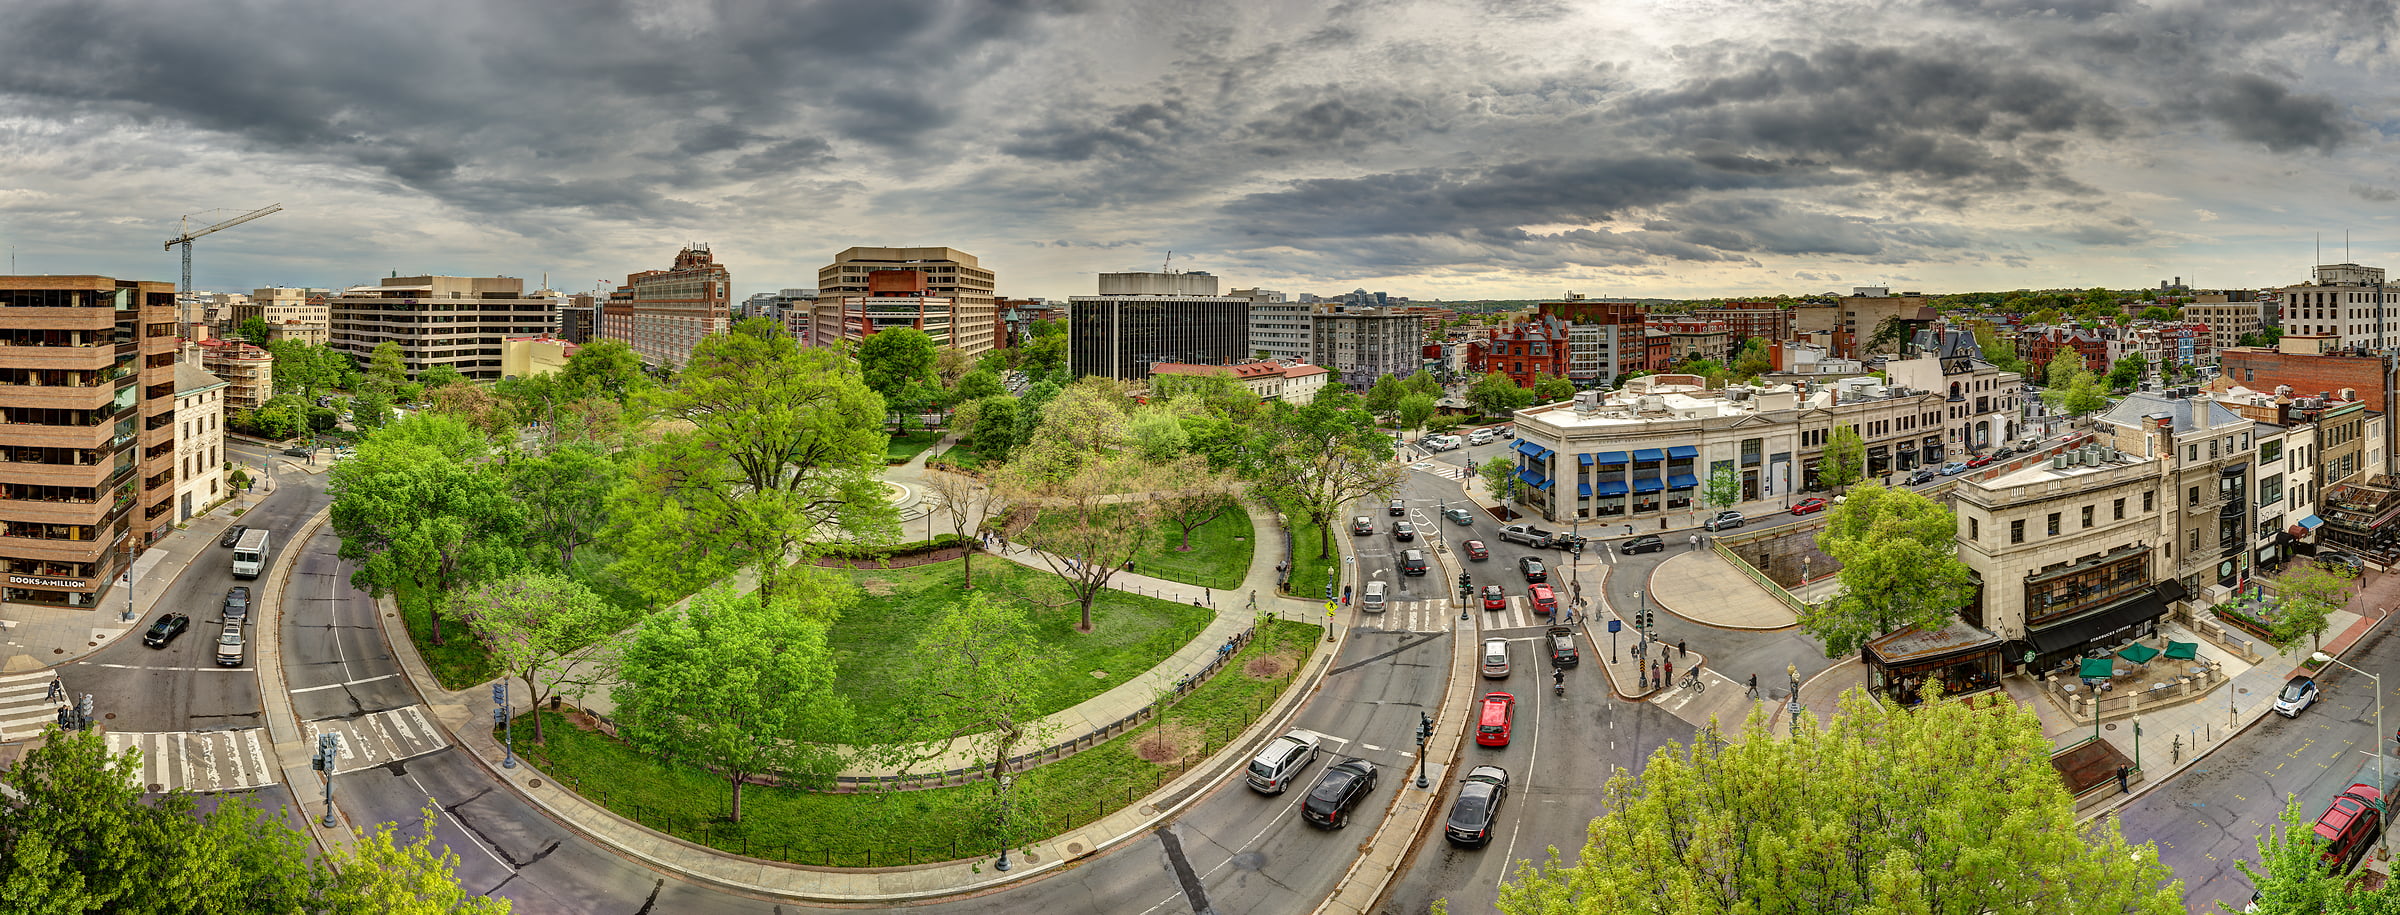 855 megapixels! A very high resolution, large-format VAST photo print of Dupont Circle in Washington DC; cityscape photograph created by Tim Lo Monaco in Dupont Circle, Northwest Washington, D.C.